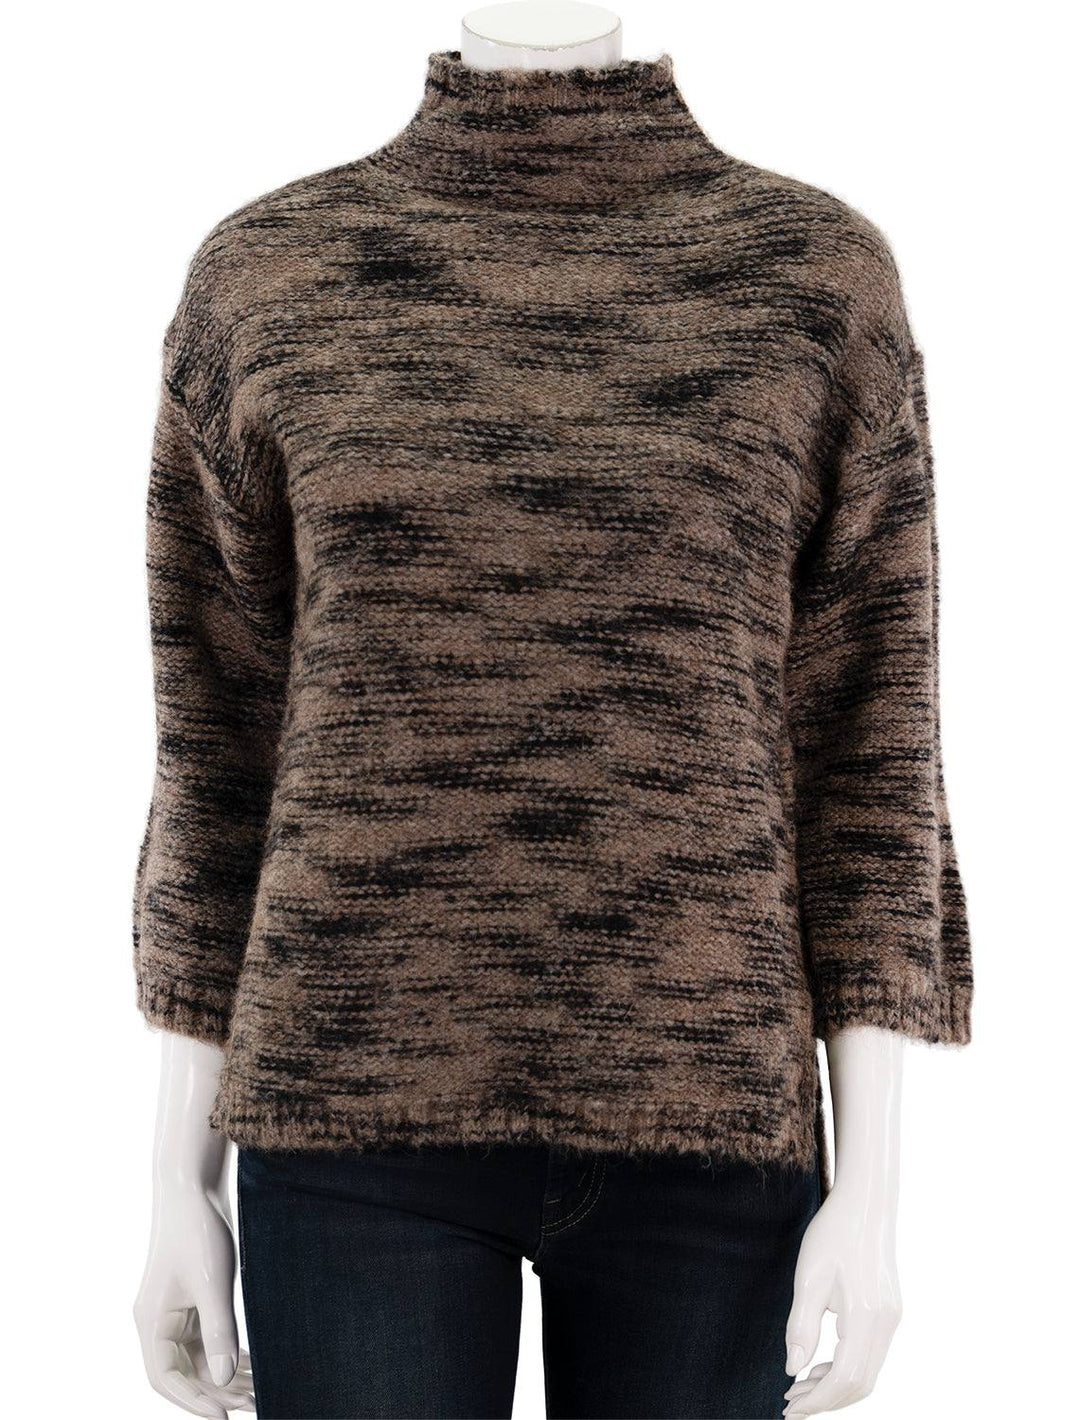 Front view of Ann Mashburn's anoa tiger sweater.